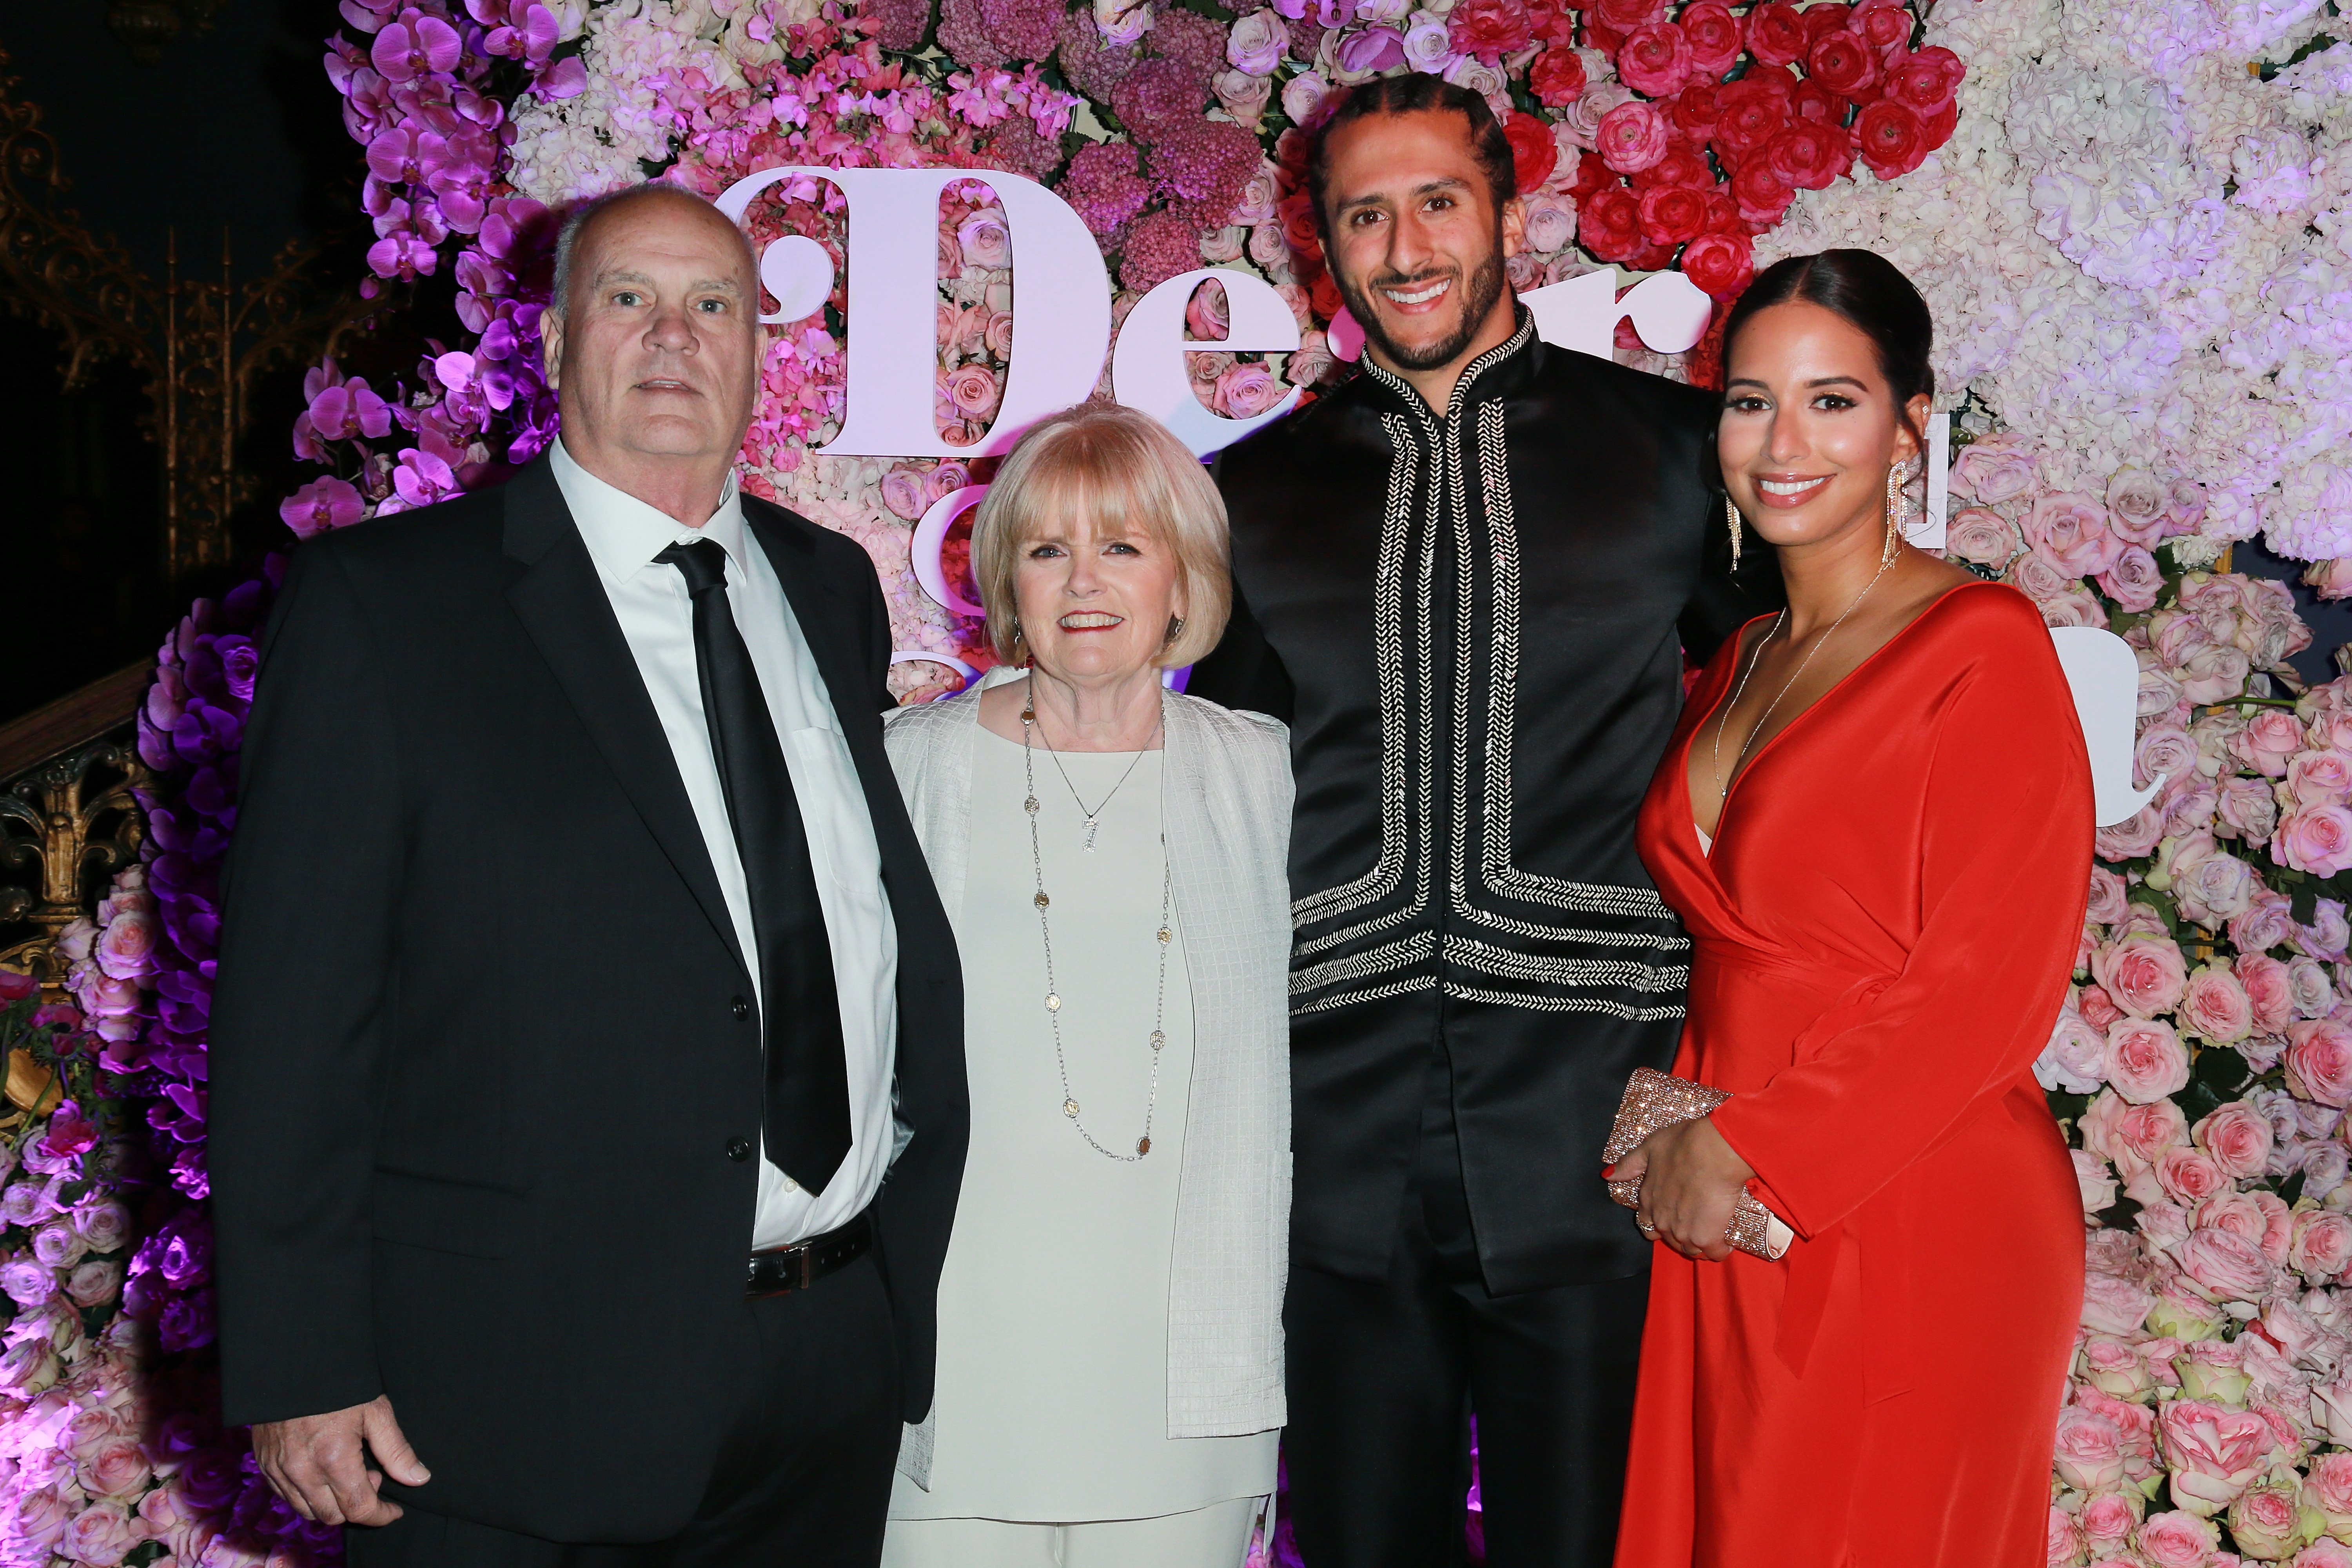 Rick Kaepernick, Teresa Kaepernick, Colin Kaepernick and Nessa Diab posed at the VH1's 3rd Annual "Dear Mama: A Love Letter To Moms" - Cocktail Reception in Los Angeles | Source: Getty Images